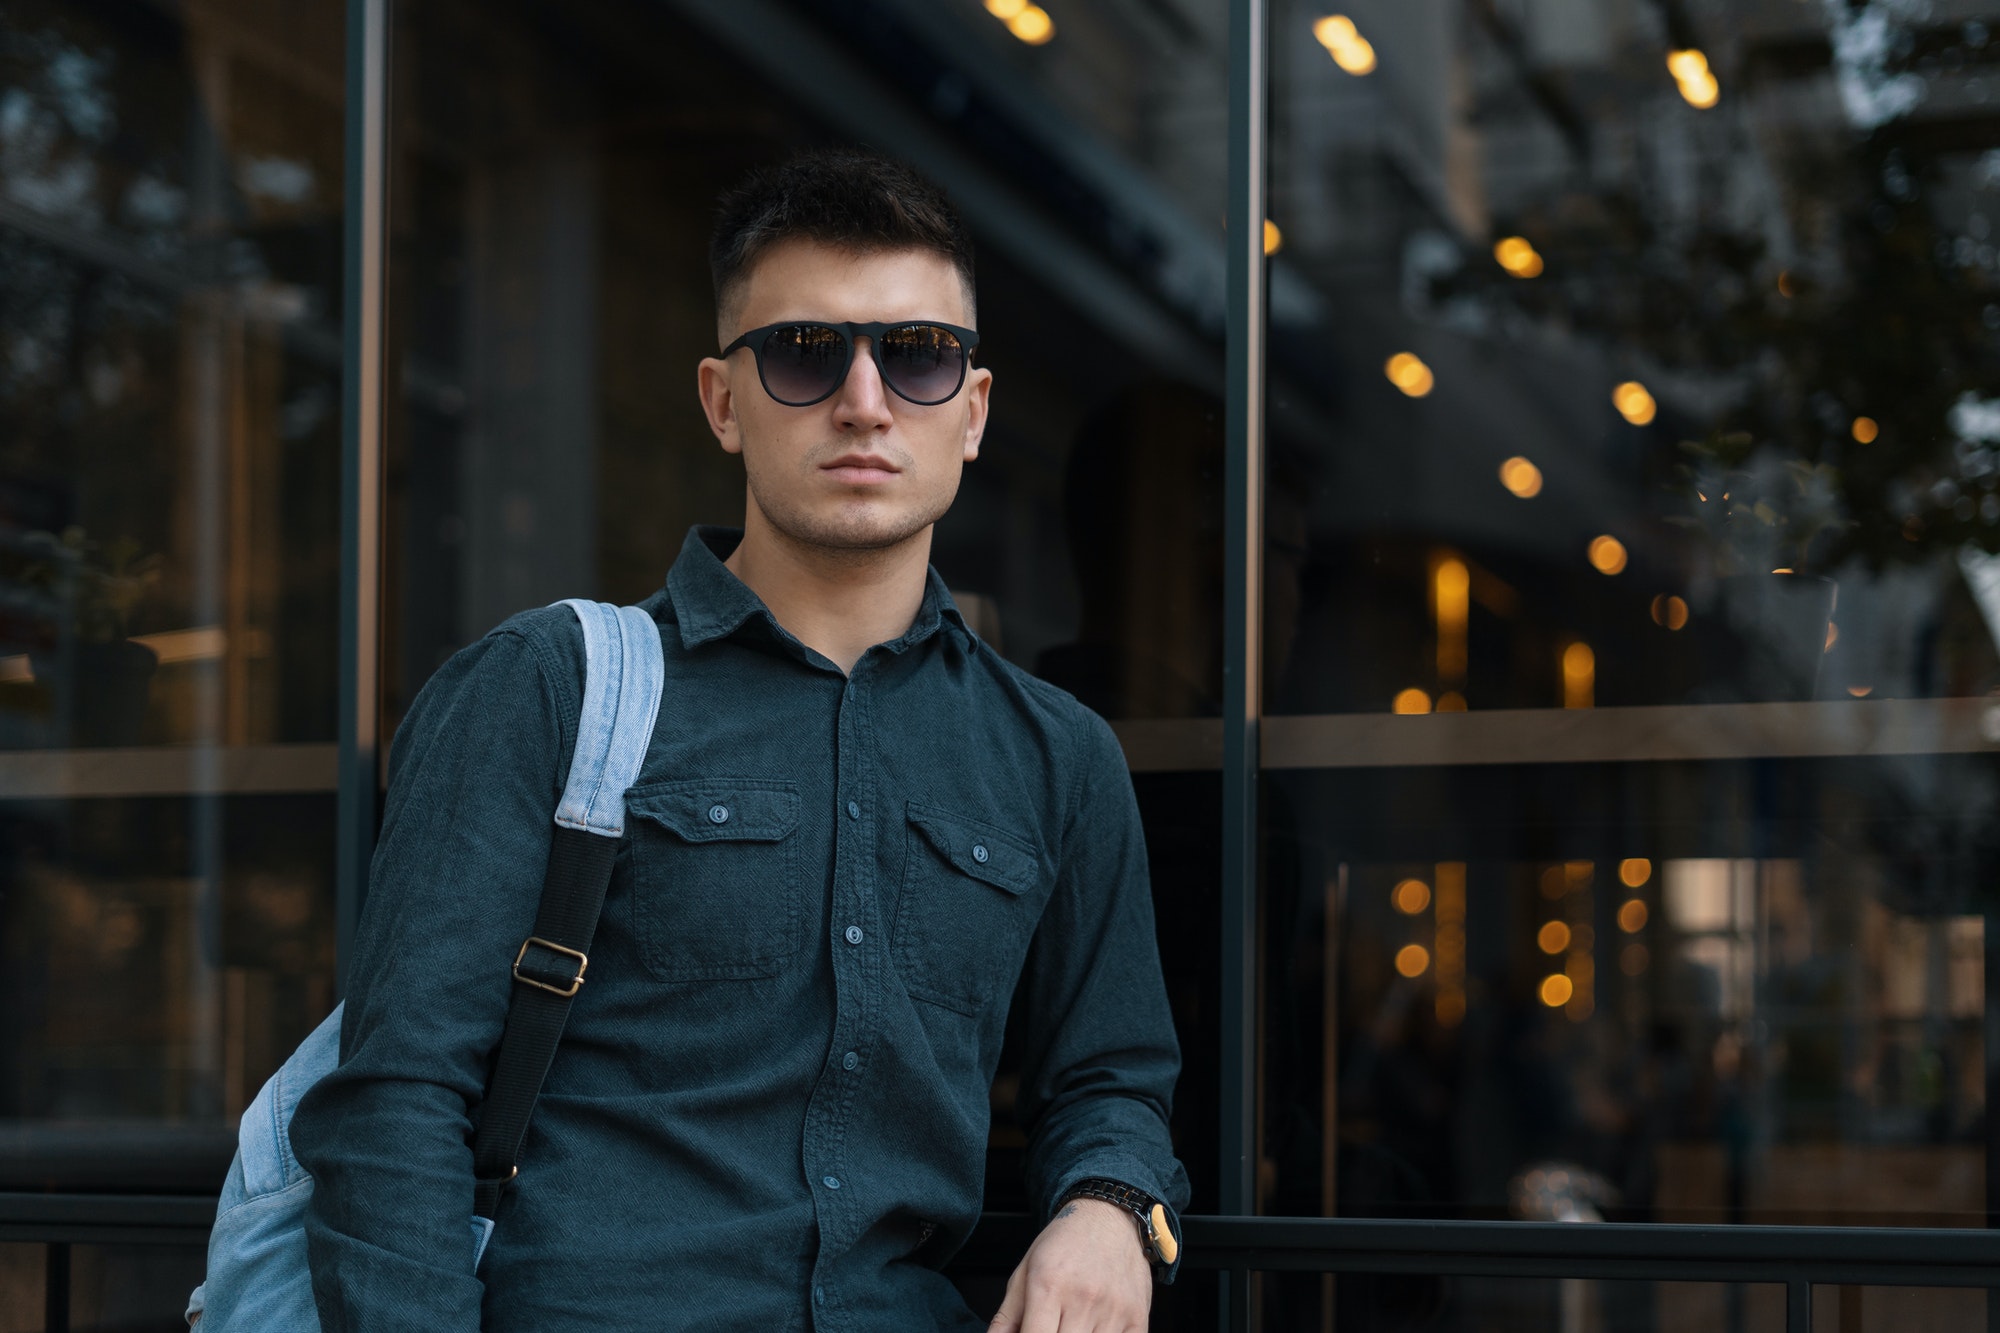 Modern young male with sunglasses and backpack